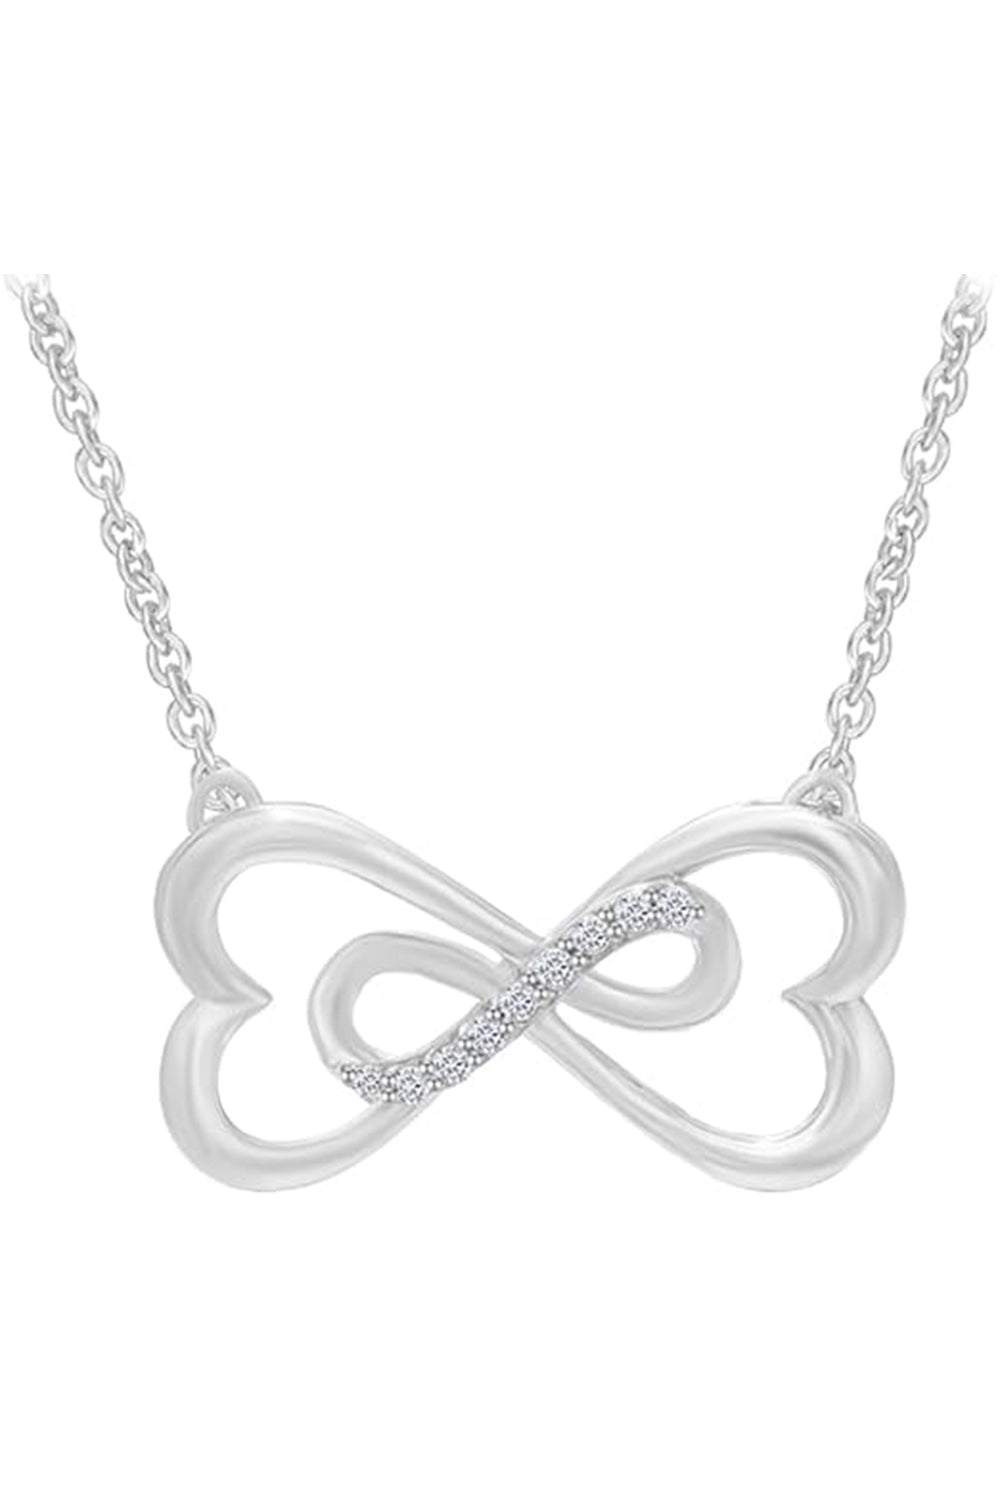 White Gold Color Sideways Heart Shaped Infinity Necklace